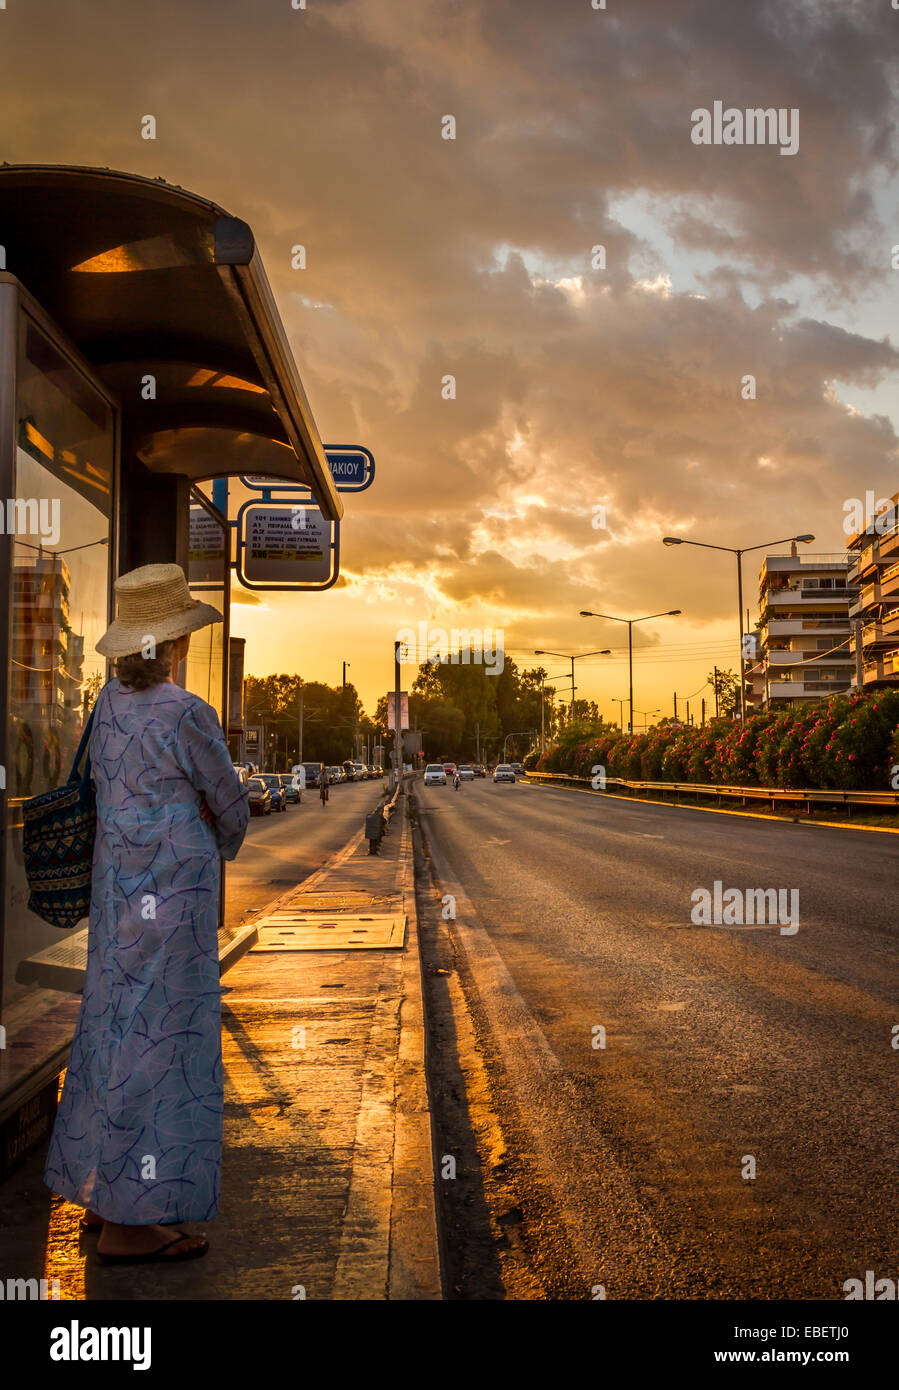 A lady waiting for the bus in sunset. Stock Photo